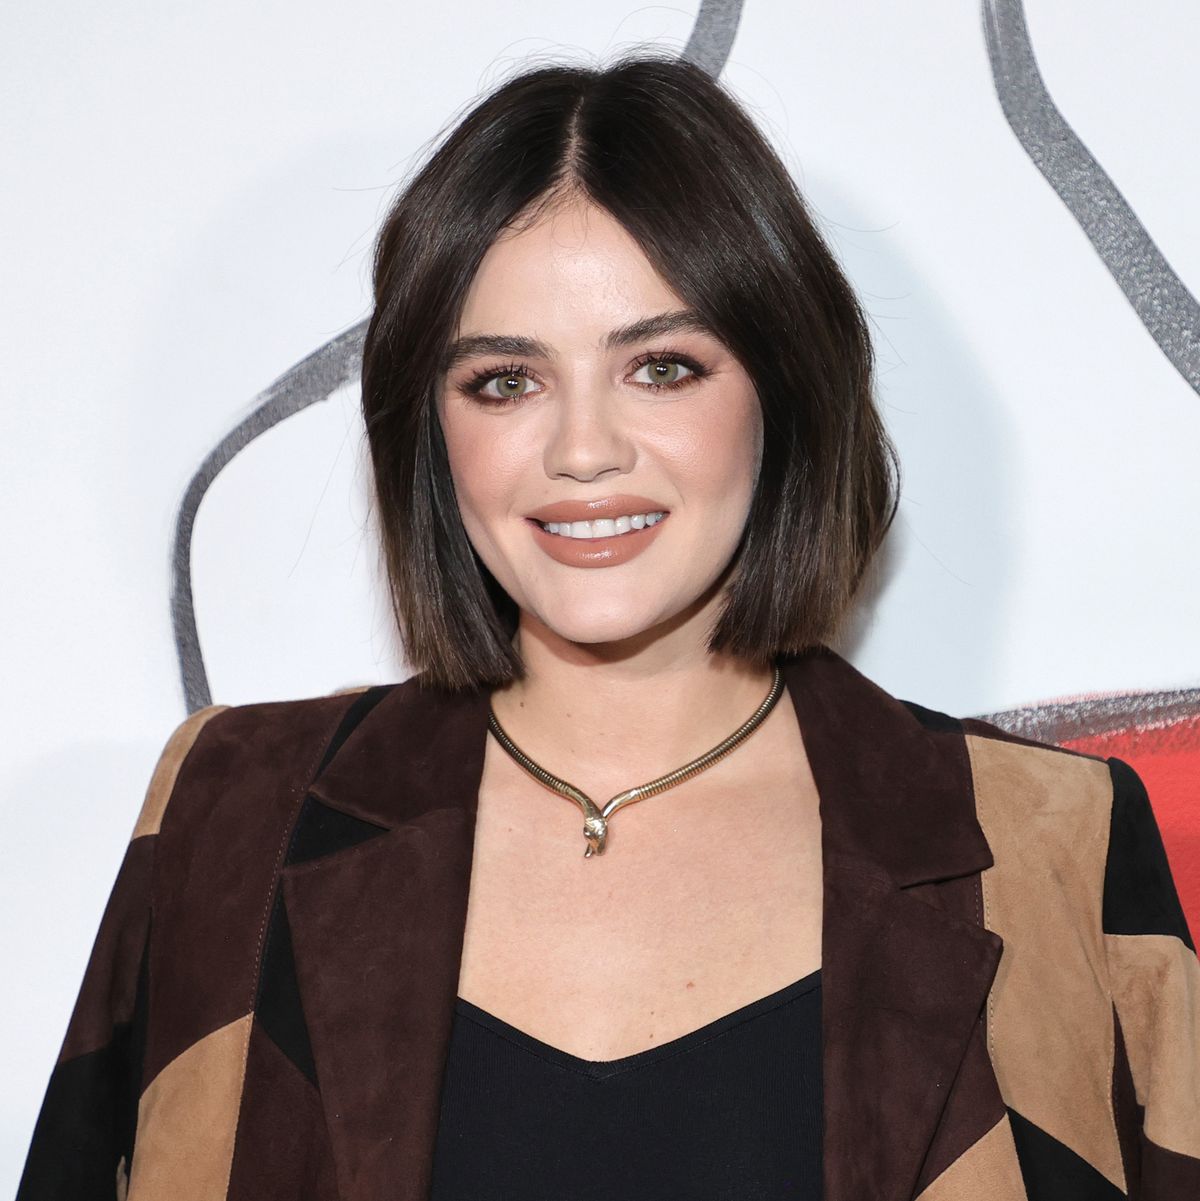 alice + olivia By Stacey Bendet - September 2021 - New York Fashion Week: The ShowsNEW YORK, NEW YORK - SEPTEMBER 10: Lucy Hale attends alice + olivia by Stacey Bendet during September 2021 - New York Fashion Week: The Shows on September 10, 2021 in New York City. (Photo by Jamie McCarthy/Getty Images for alice + olivia)